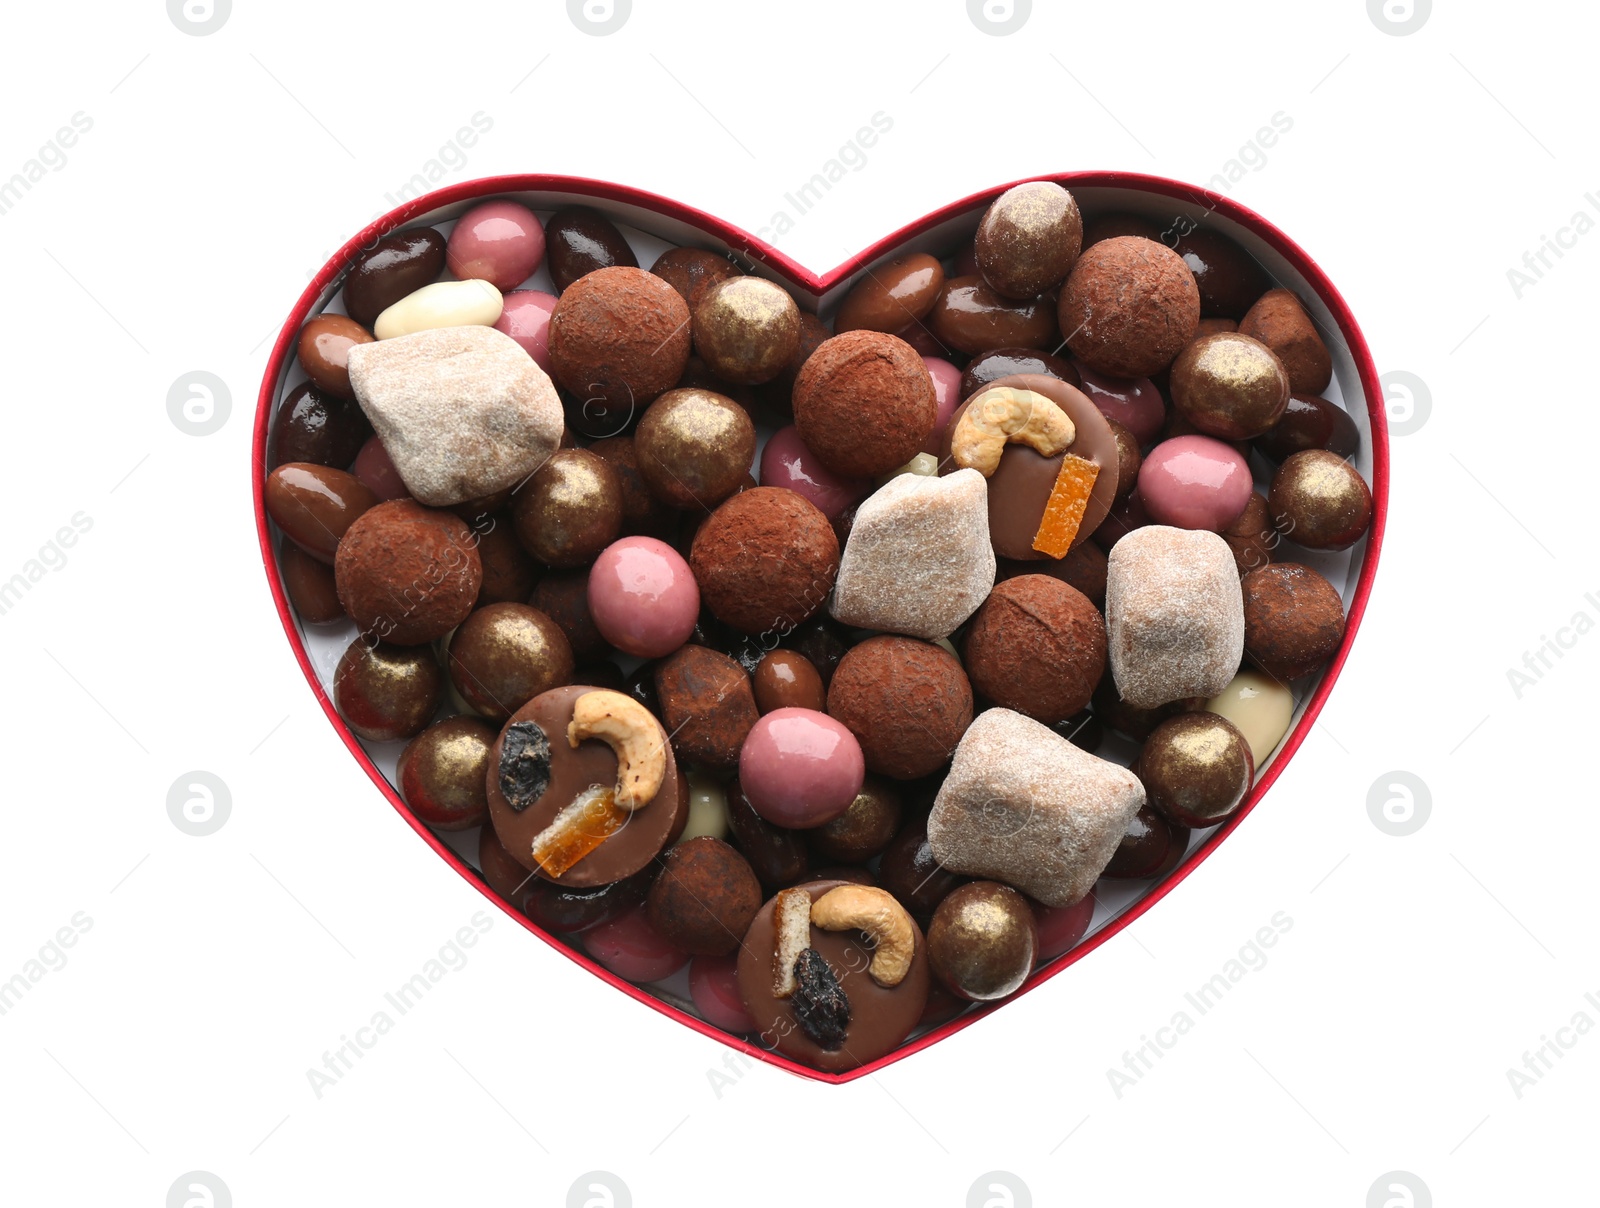 Photo of Delicious chocolate candies in heart shaped box on white background, top view